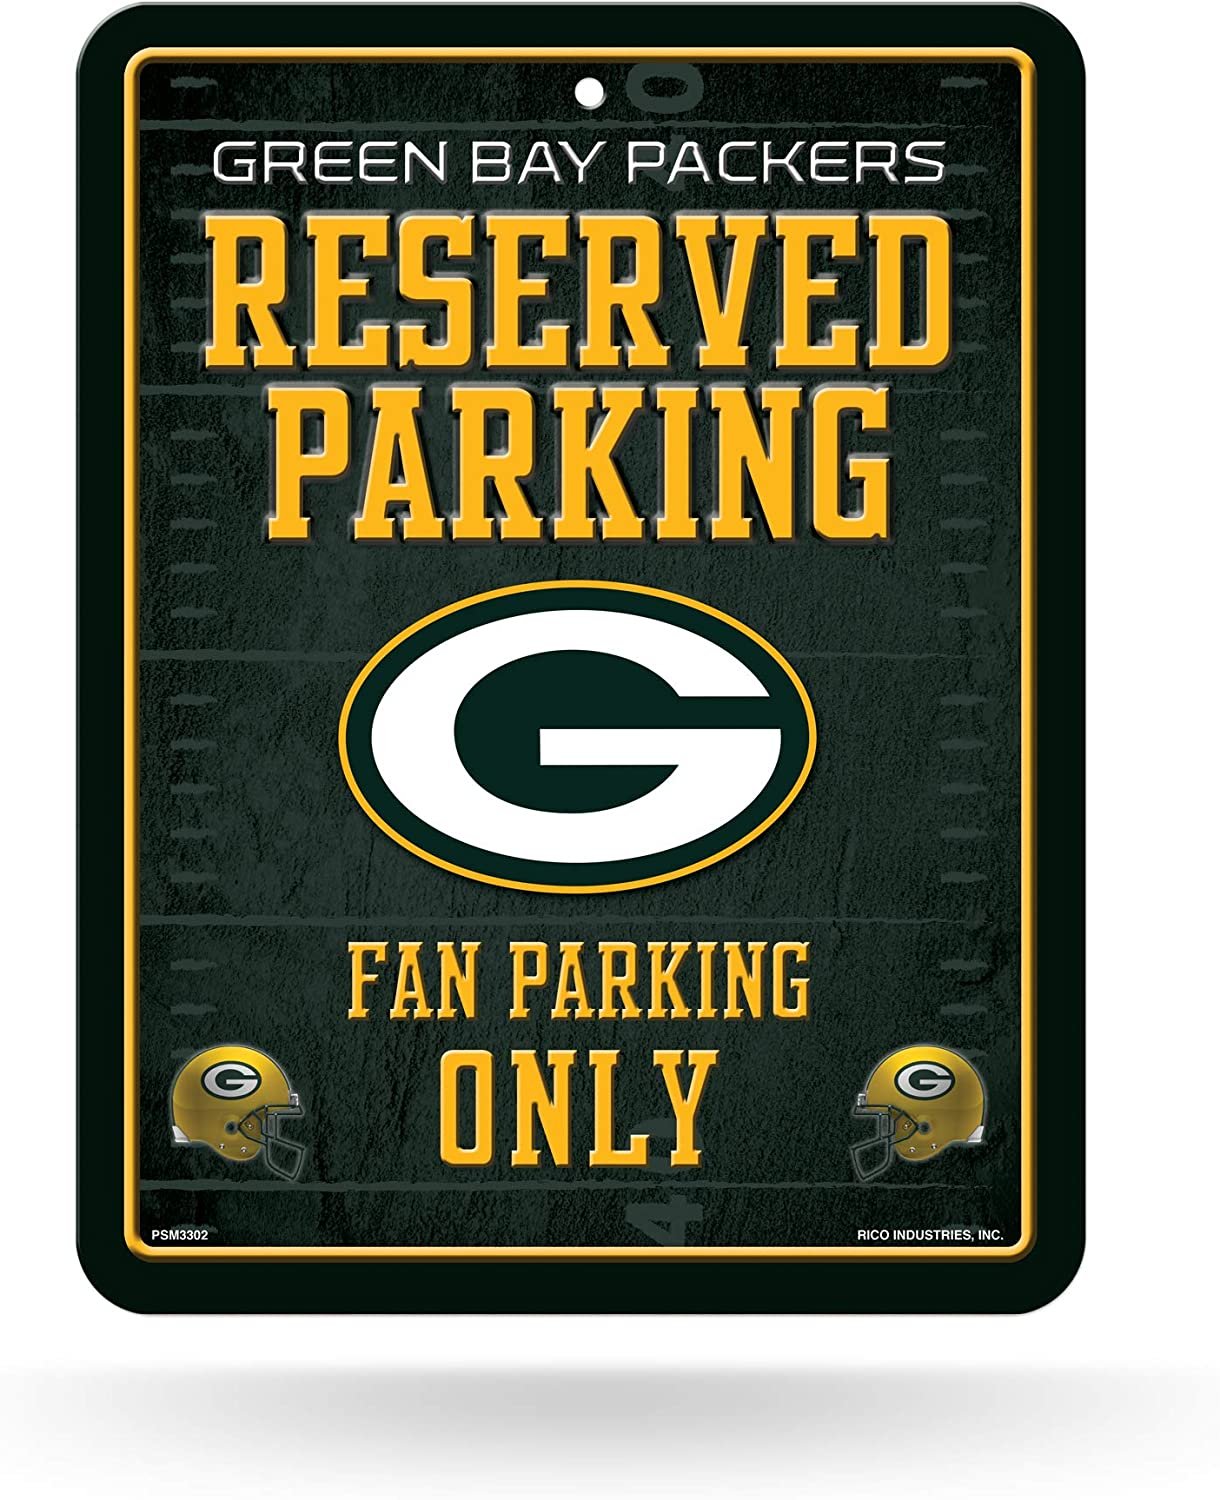 Green Bay Packers Metal Parking Novelty Wall Sign 8.5 x 11 Inch